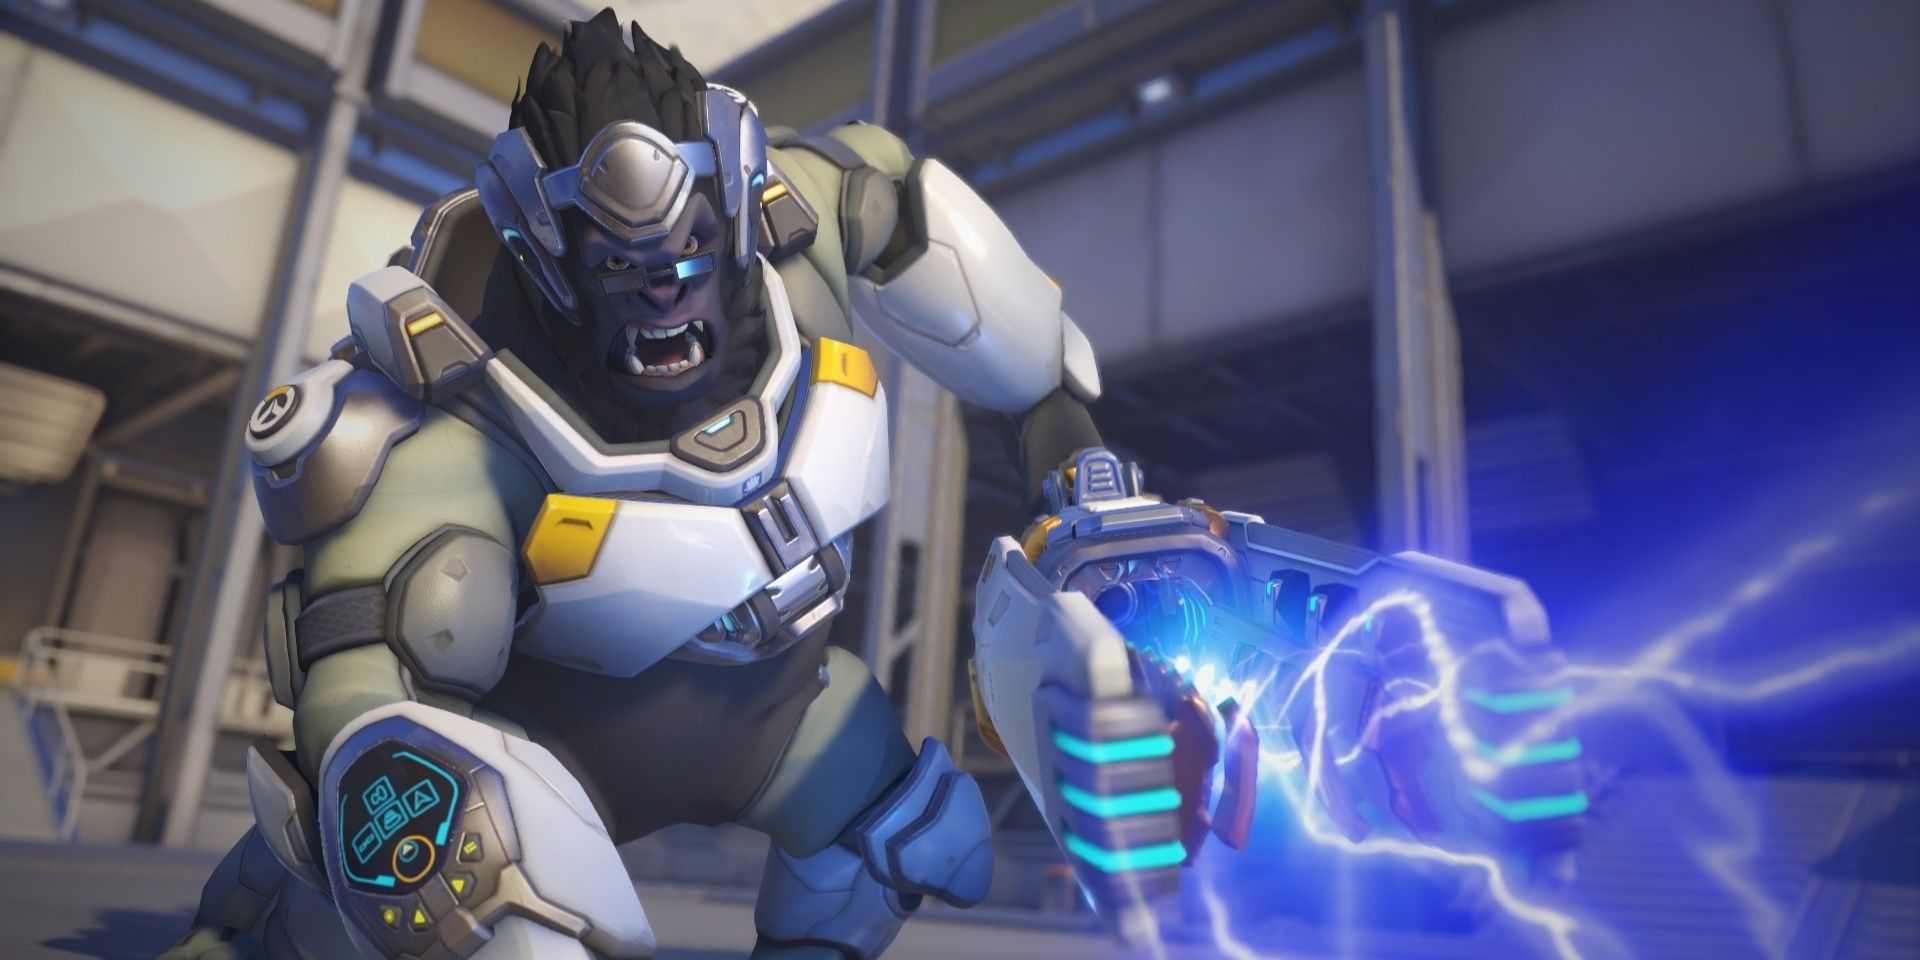 Winston shooting energy from his cannon in Overwatch 2